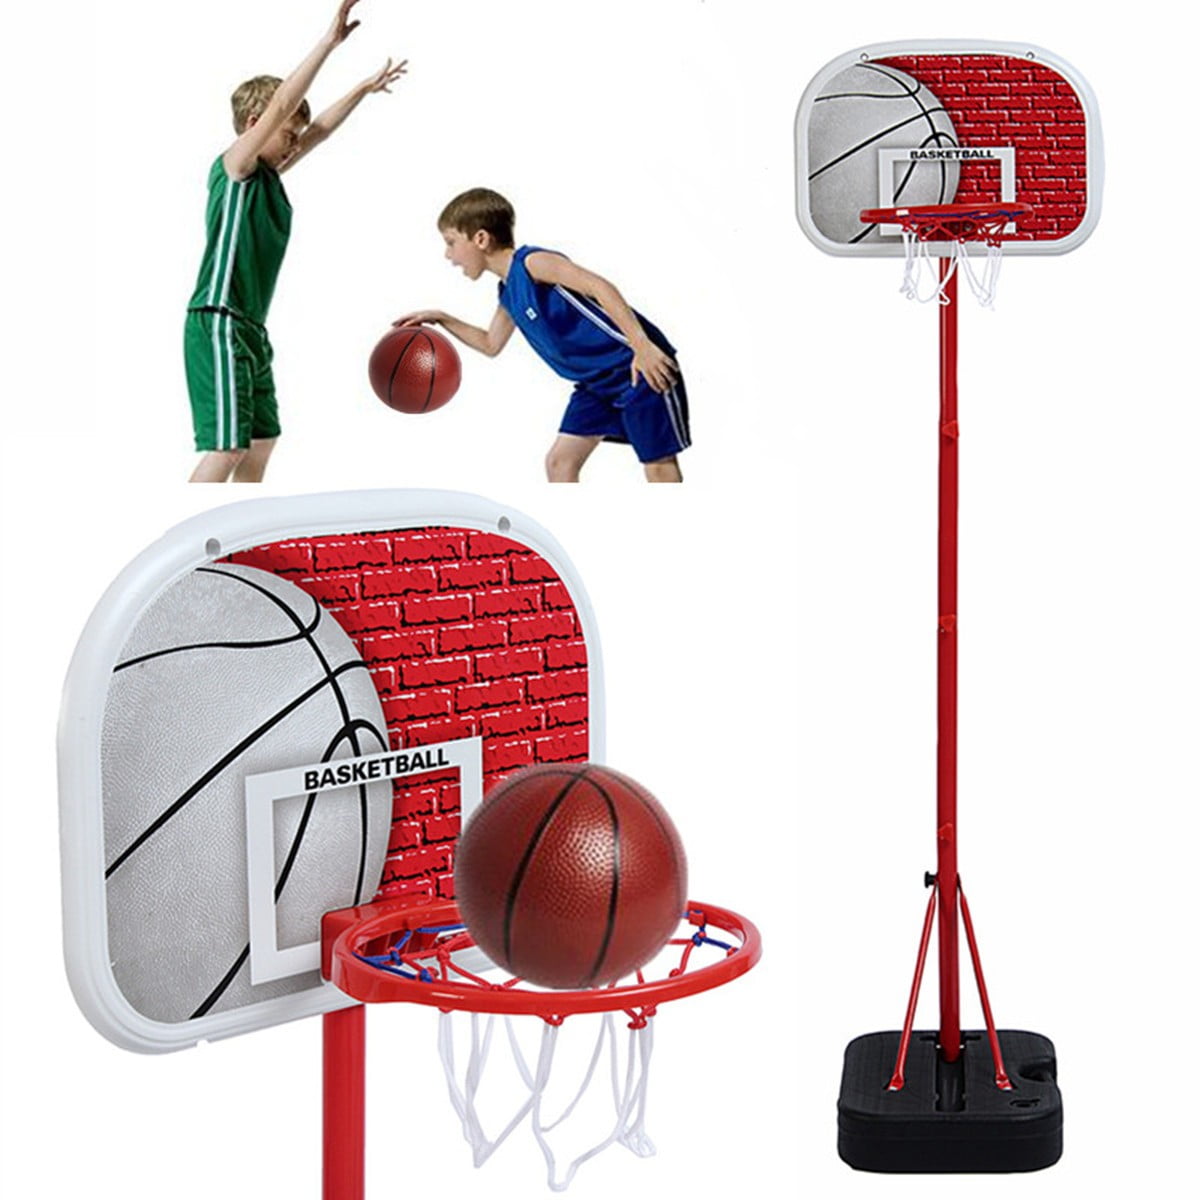 1.5m Kids Basketball Set Height Adjustable Basketball Hoop and Stands for Indoor and Outdoor Children Ball Game Play Set